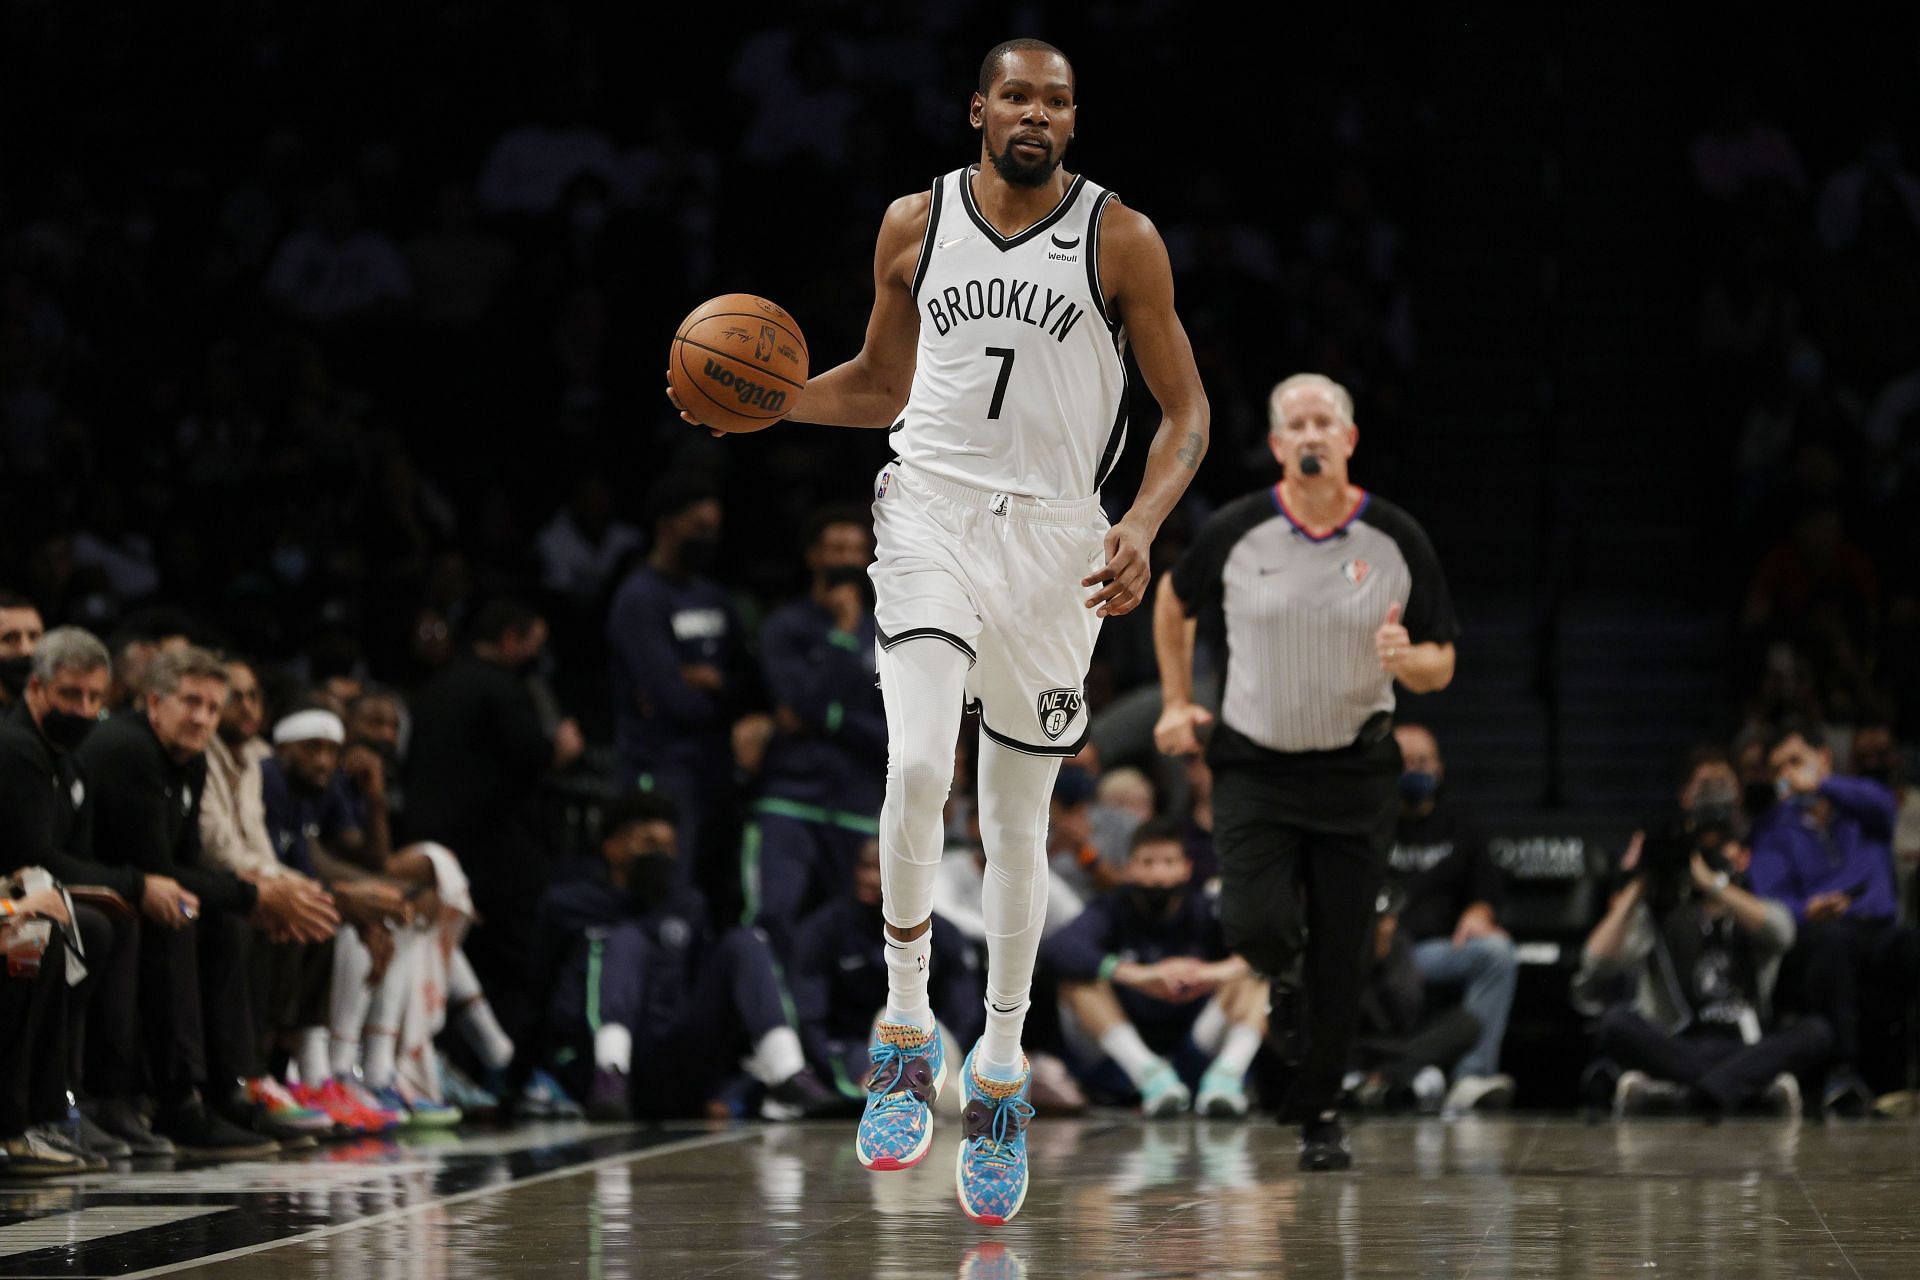 Brooklyn Nets superstar Kevin Durant is arguably the best player in the world